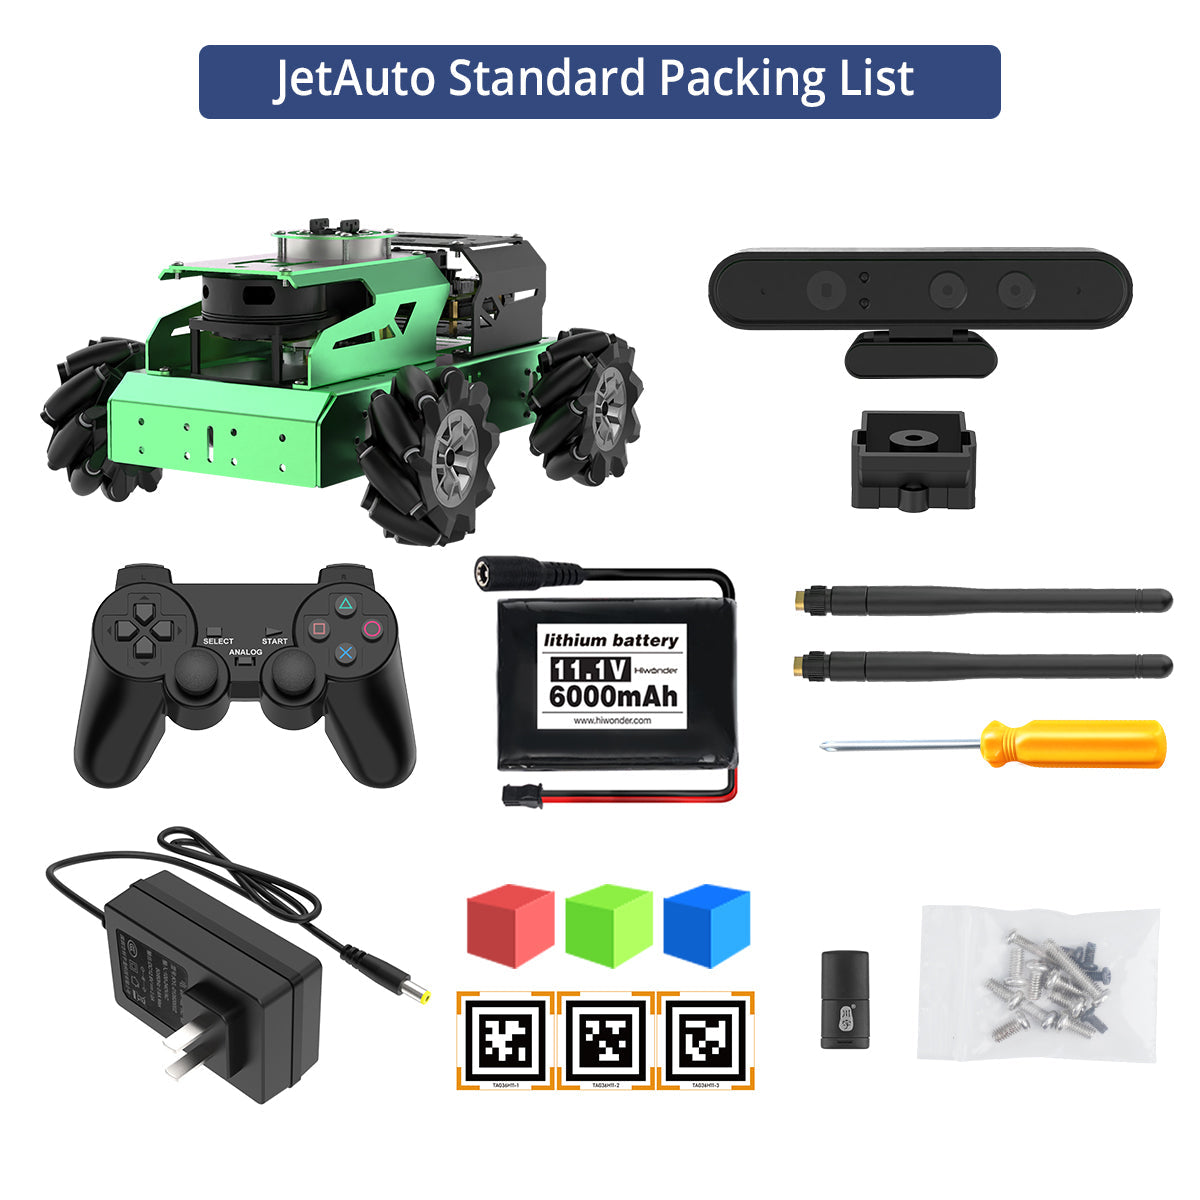 Hiwonder JetAuto ROS Robot Car Powered by Jetson Nano with Lidar Depth Camera Touch Screen, Support SLAM Mapping and Navigation